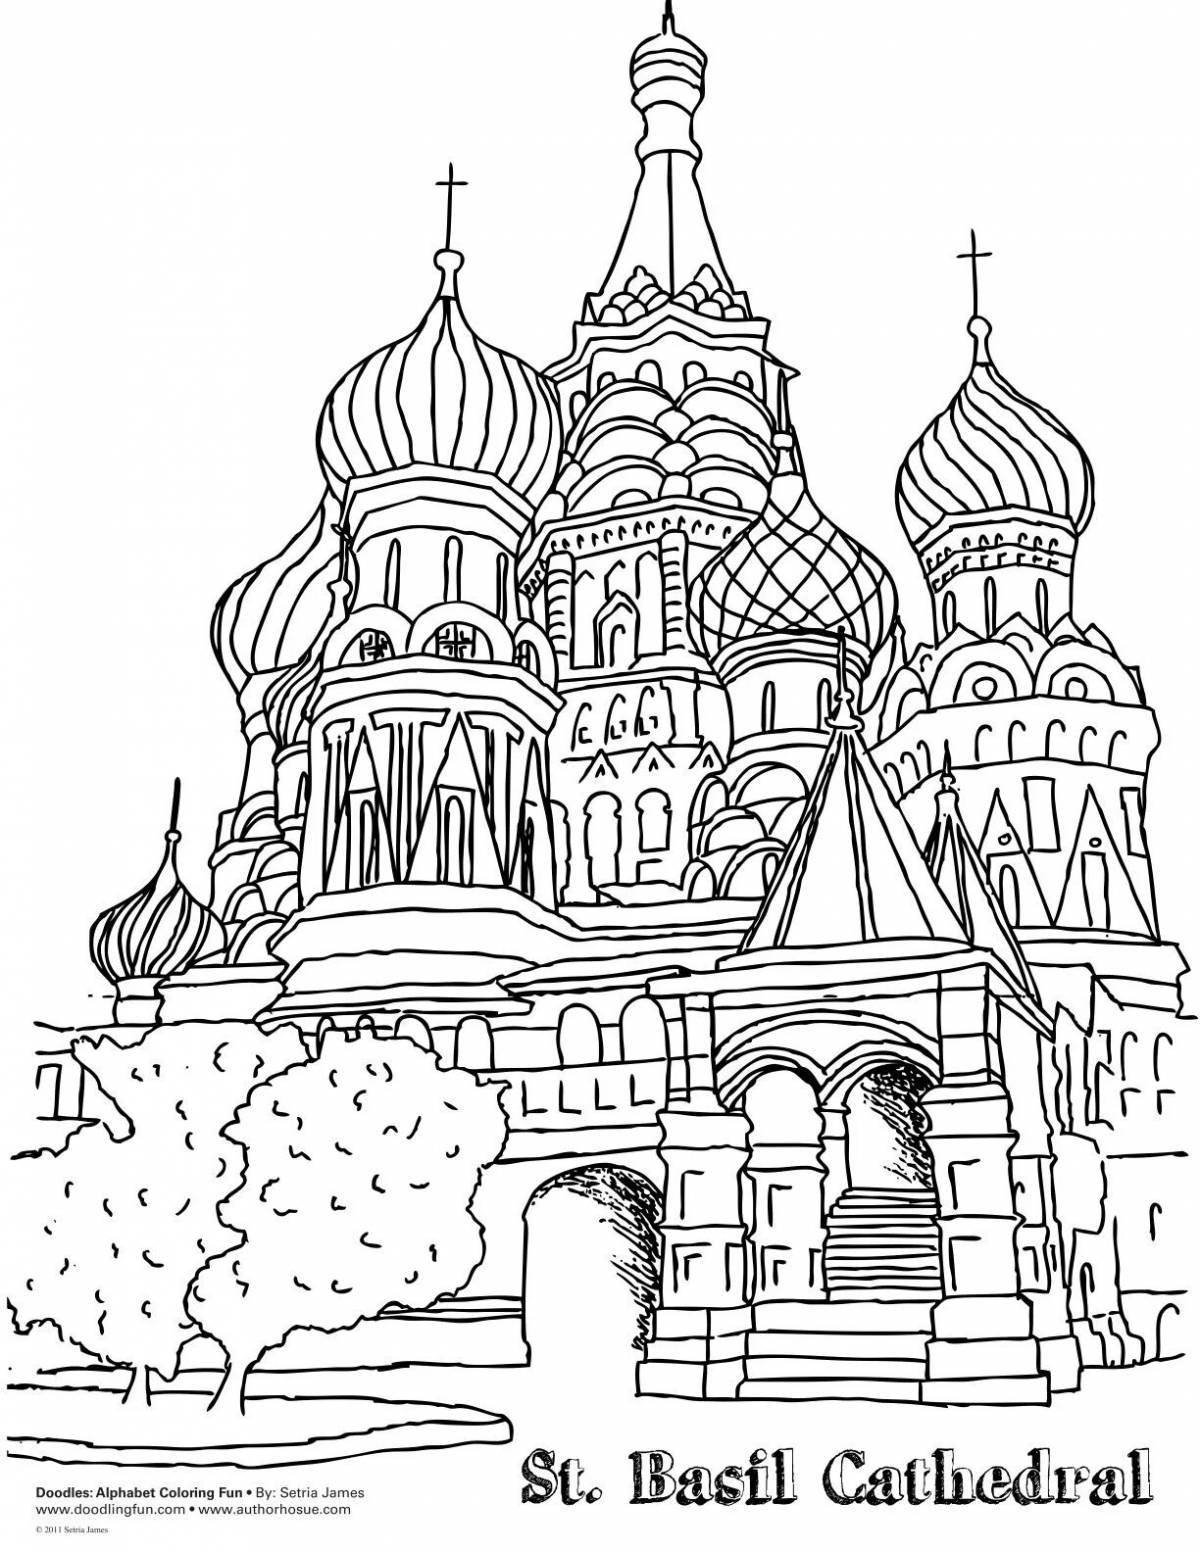 Exotic coloring pages sights of Russia